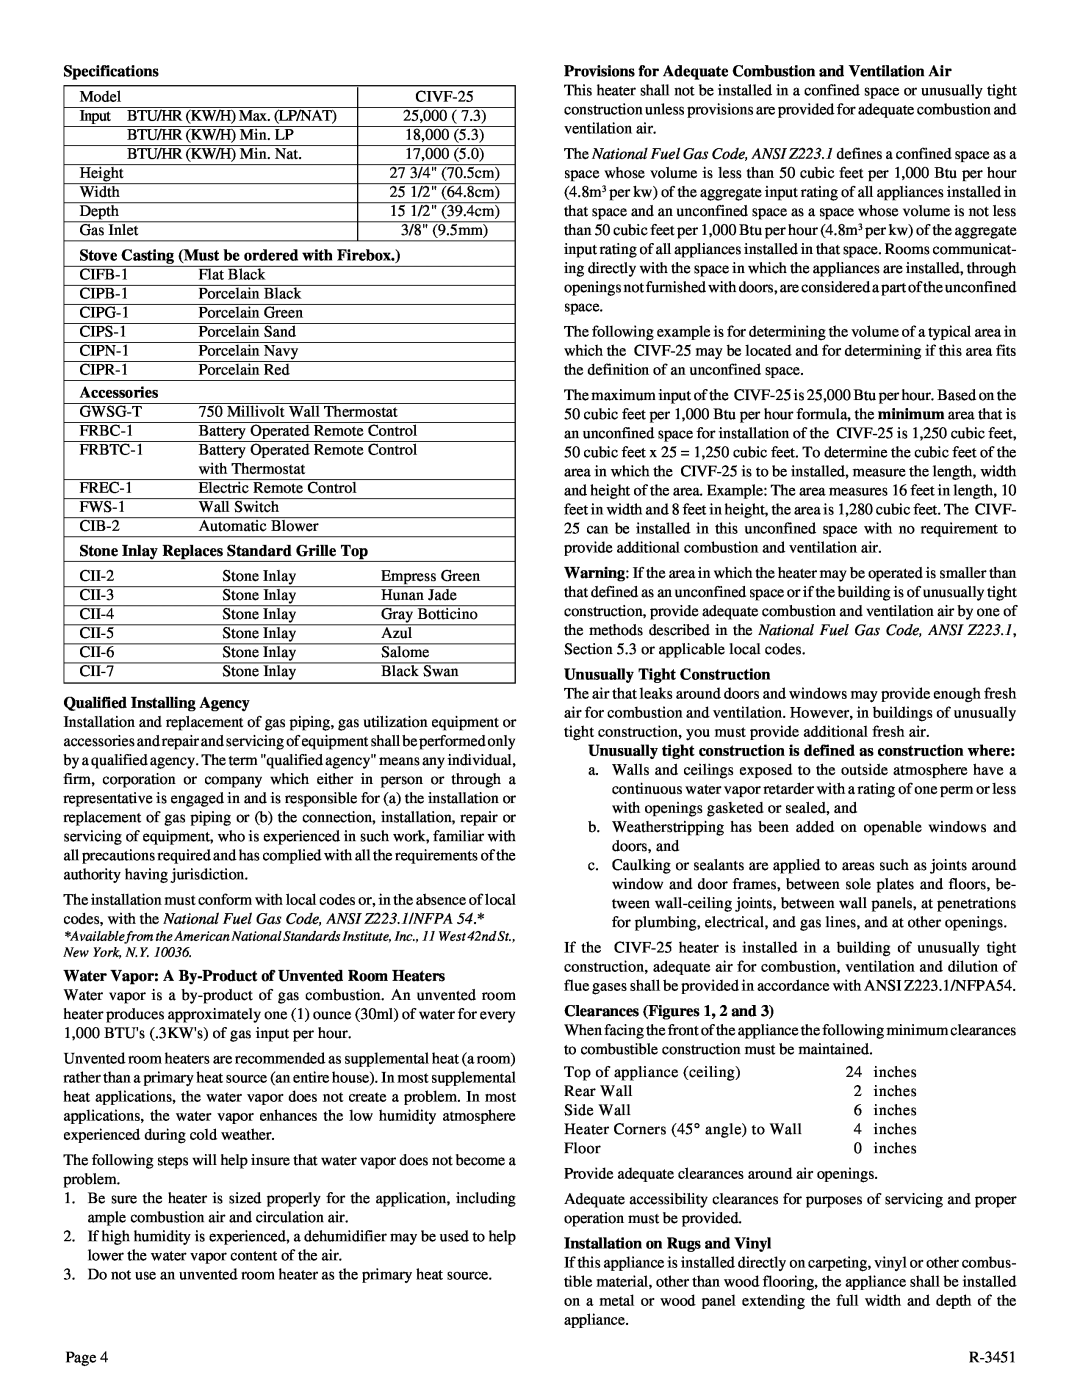 Empire Comfort Systems CIVF-25-2 installation instructions Specifications 